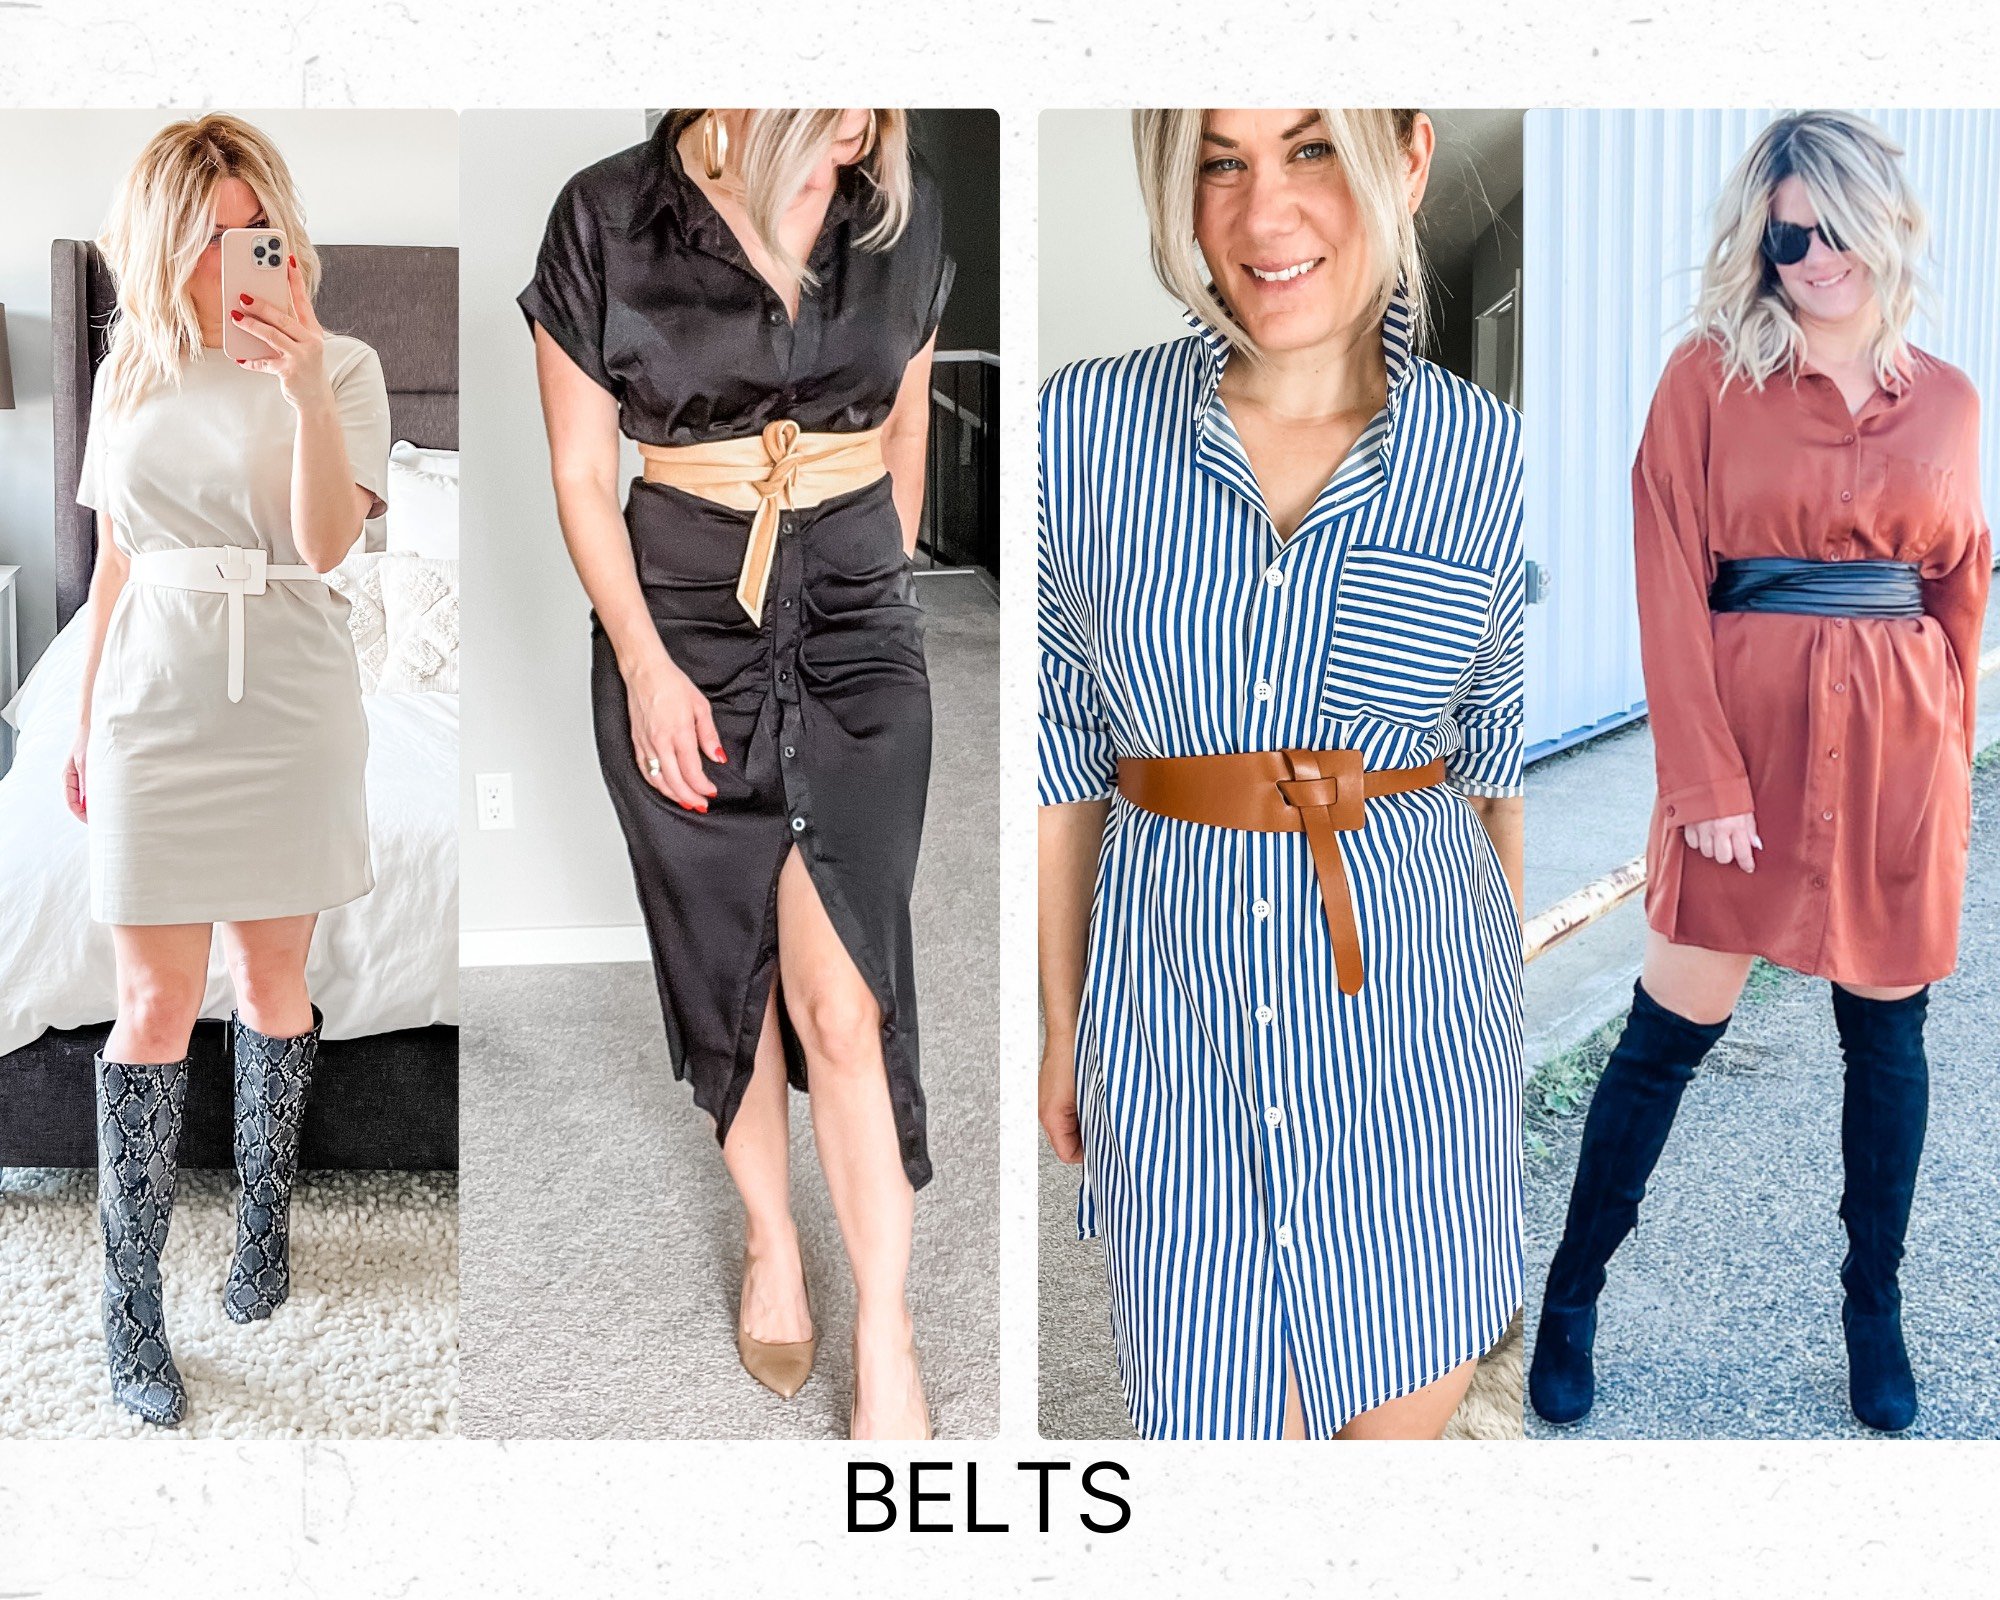 STYLE TIPS WHEN A BELT WITH A SHIRT DRESS: